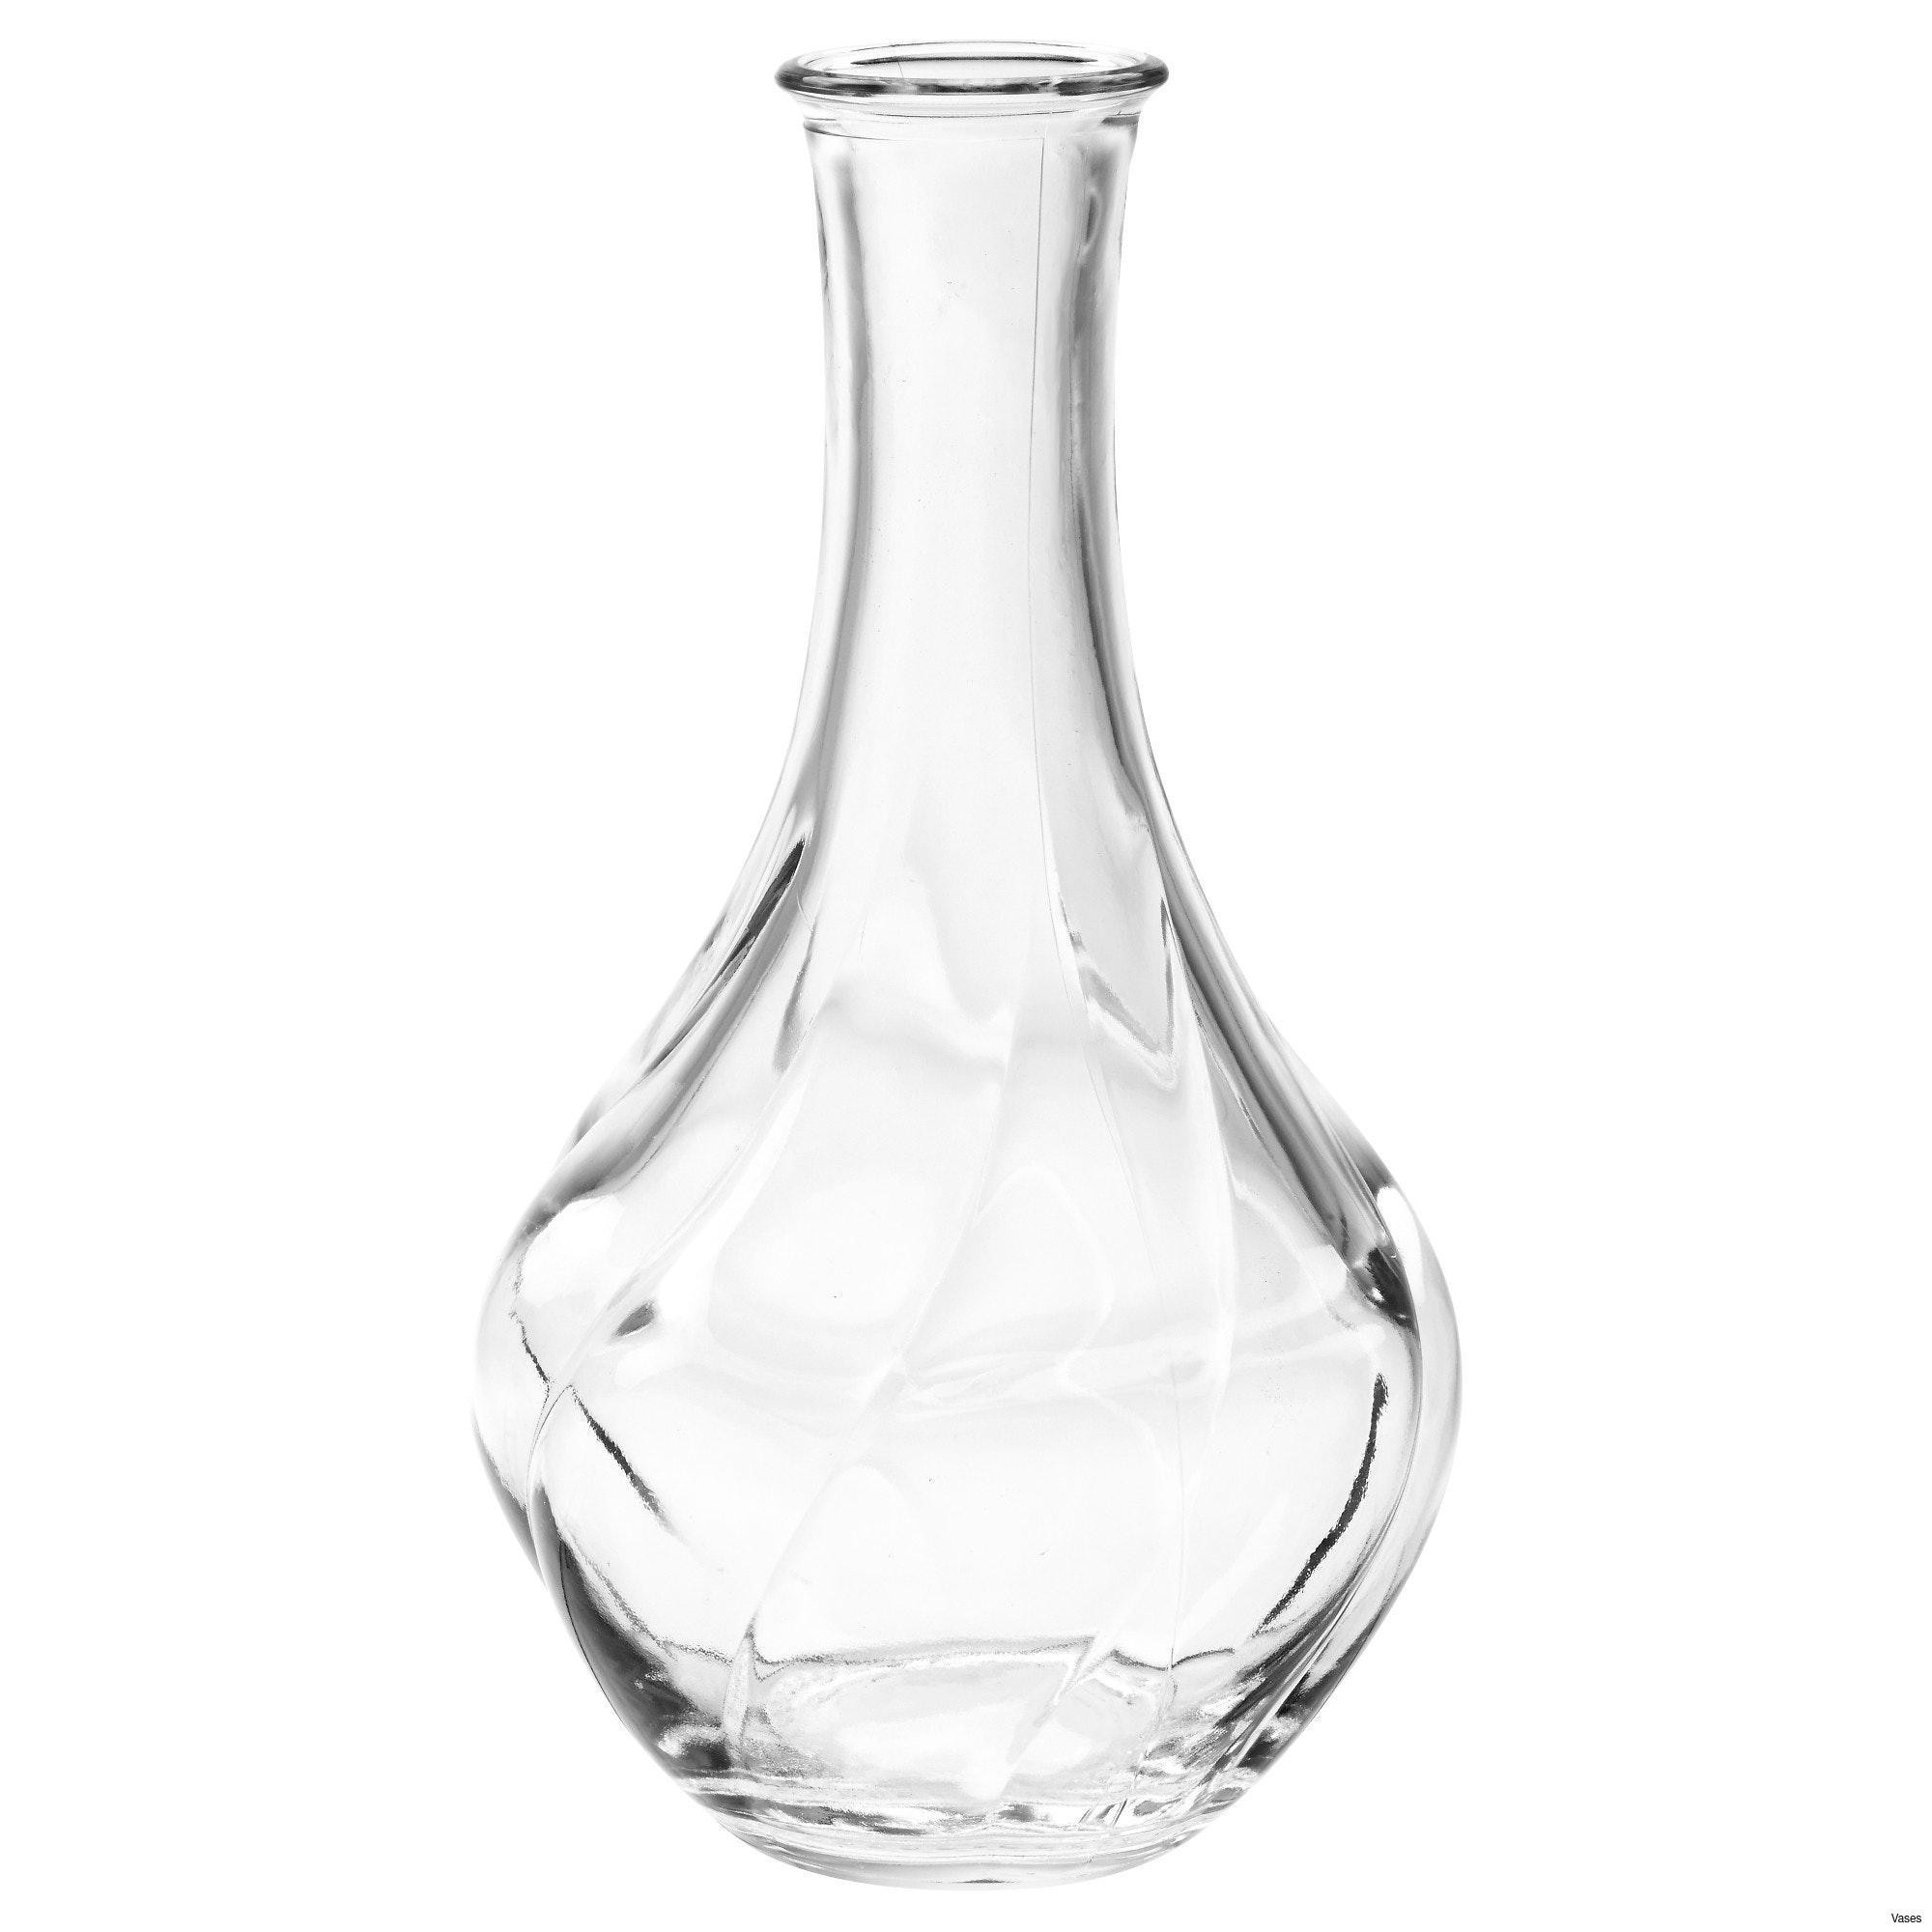 large vases for living room of large glass vase gallery living room glass vases fresh clear vase 0d with regard to large glass vase gallery living room glass vases fresh clear vase 0d tags amazing and of